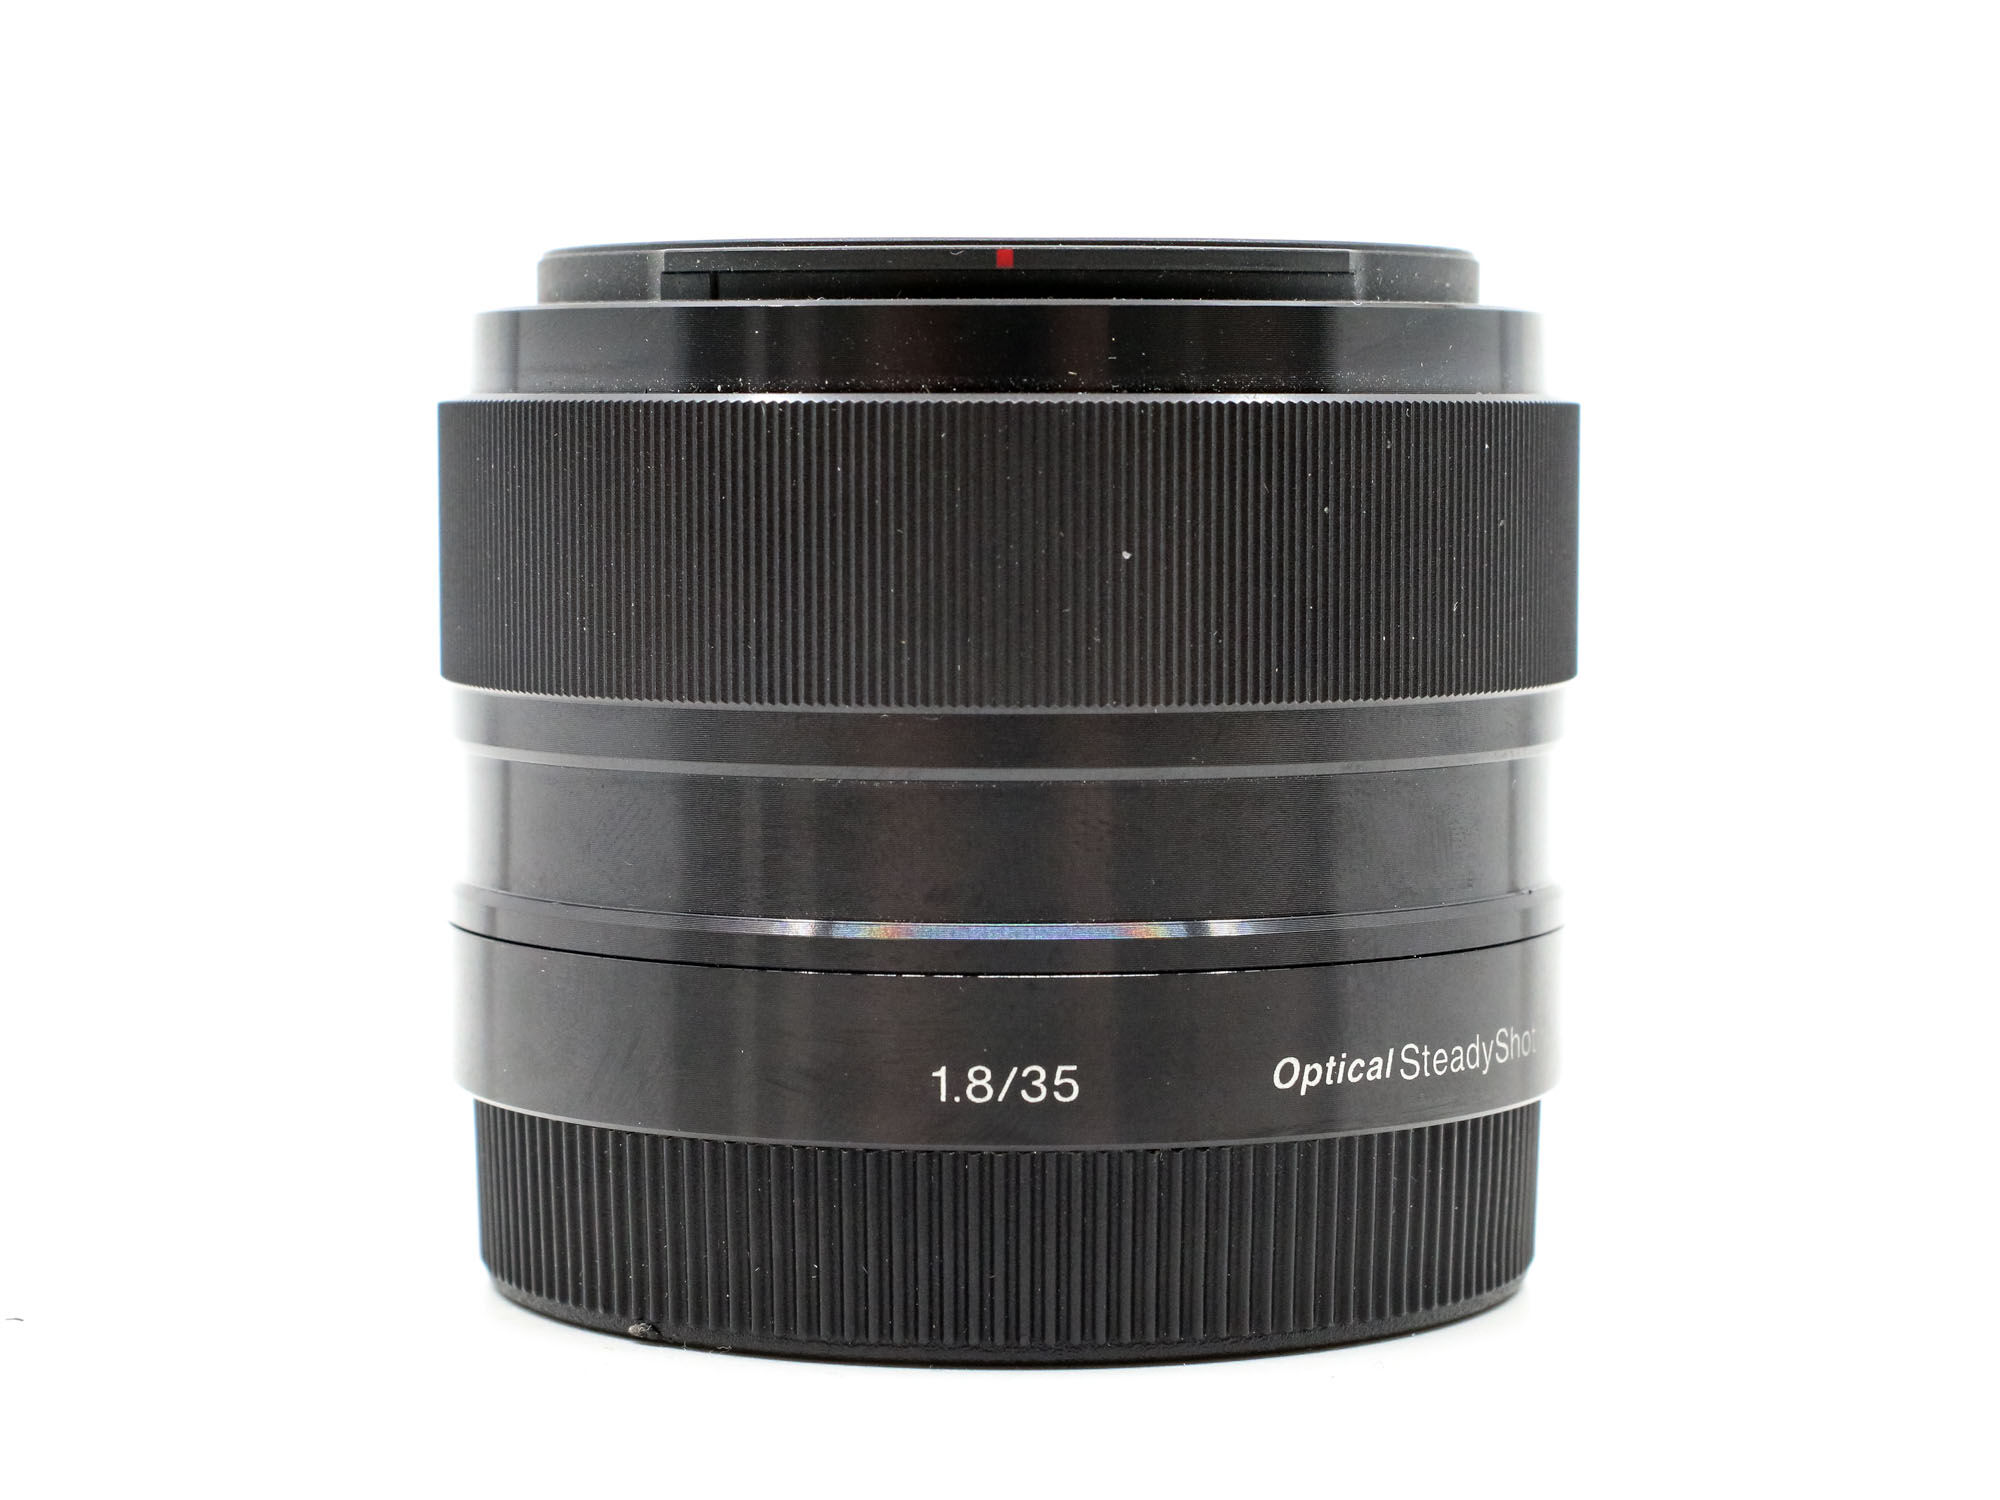 Sony E 35mm f/1.8 OSS (Condition: Like New)